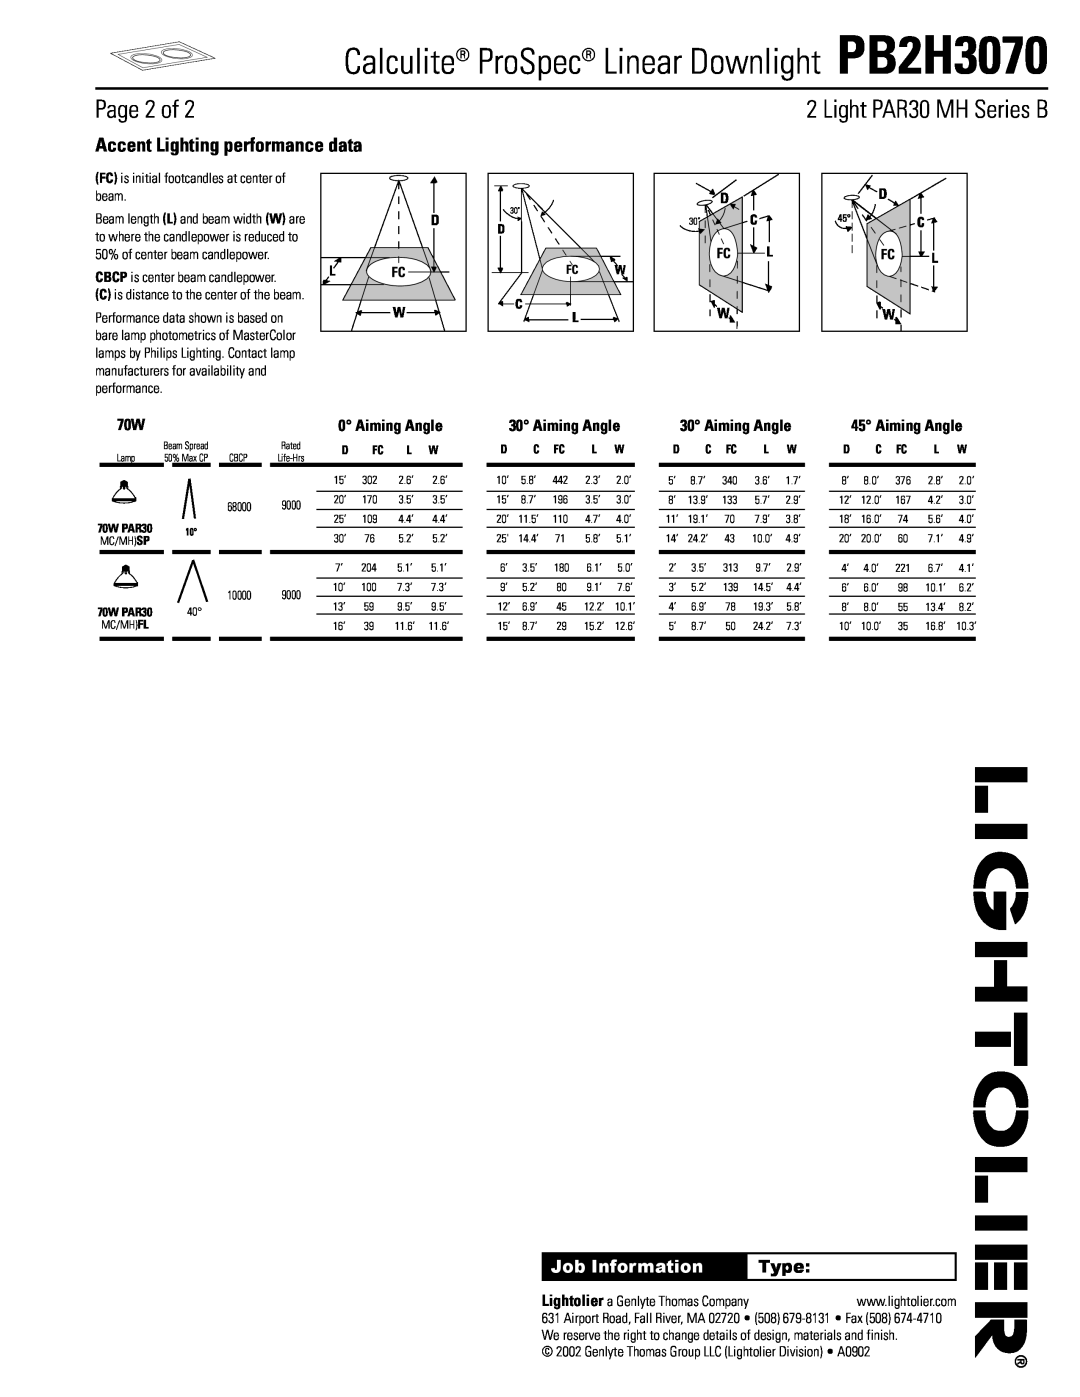 Lightolier Page 2 of, Accent Lighting performance data, Aiming Angle, Calculite ProSpec Linear Downlight PB2H3070, Type 